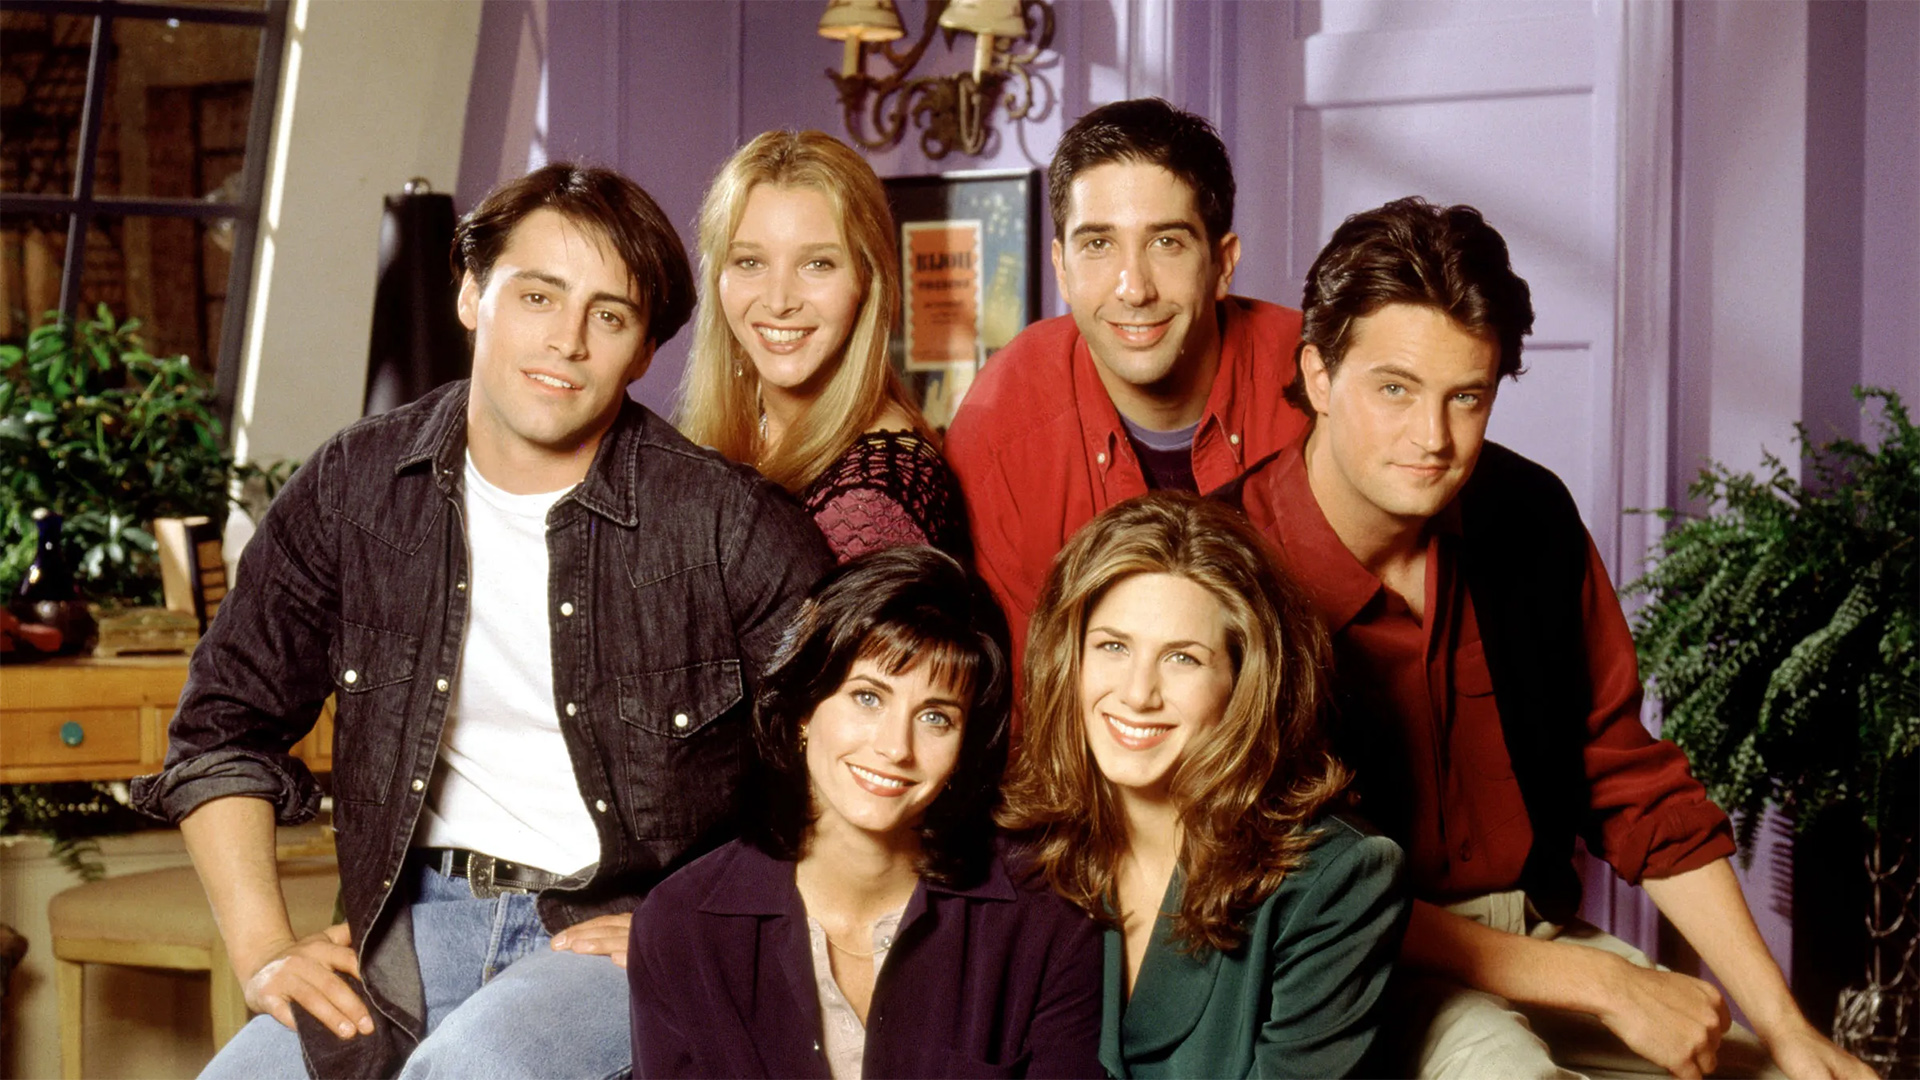 Friends Universal Television Why We Shouldn't Judge What People Watch